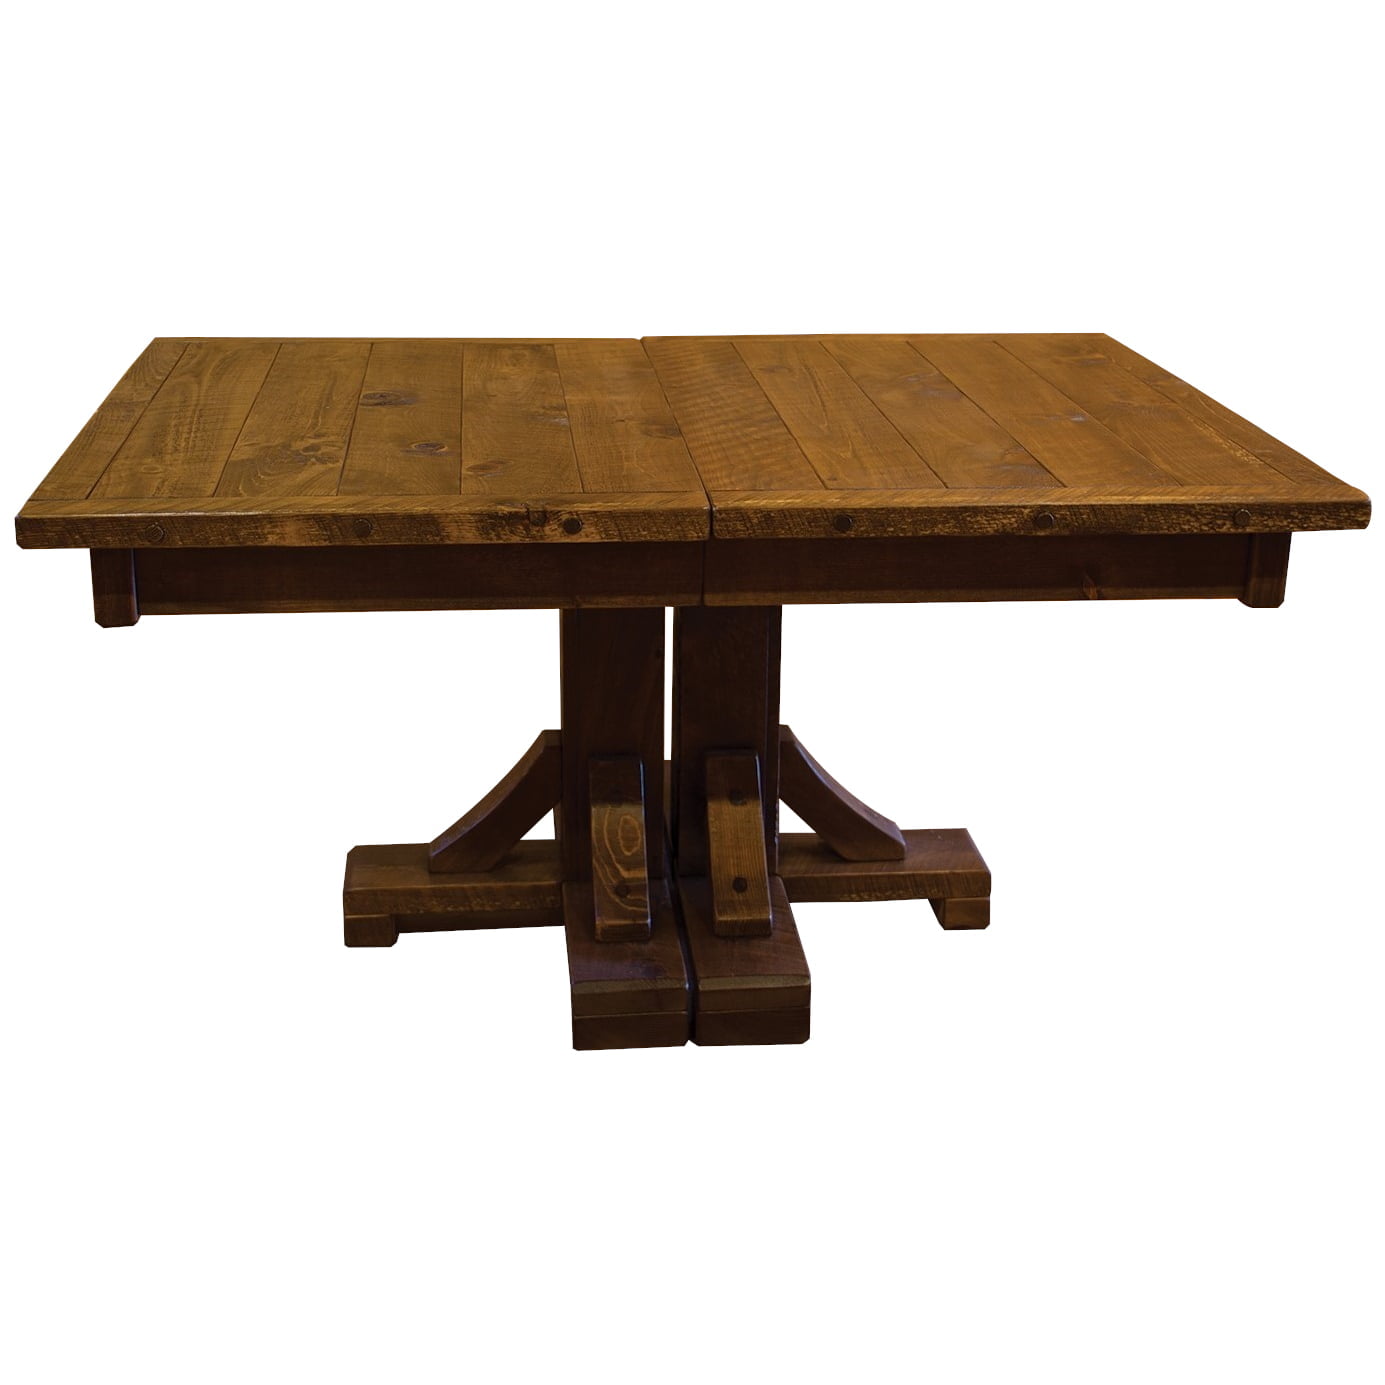 Barnwood Style Timber Peg Pedestal Extension Table